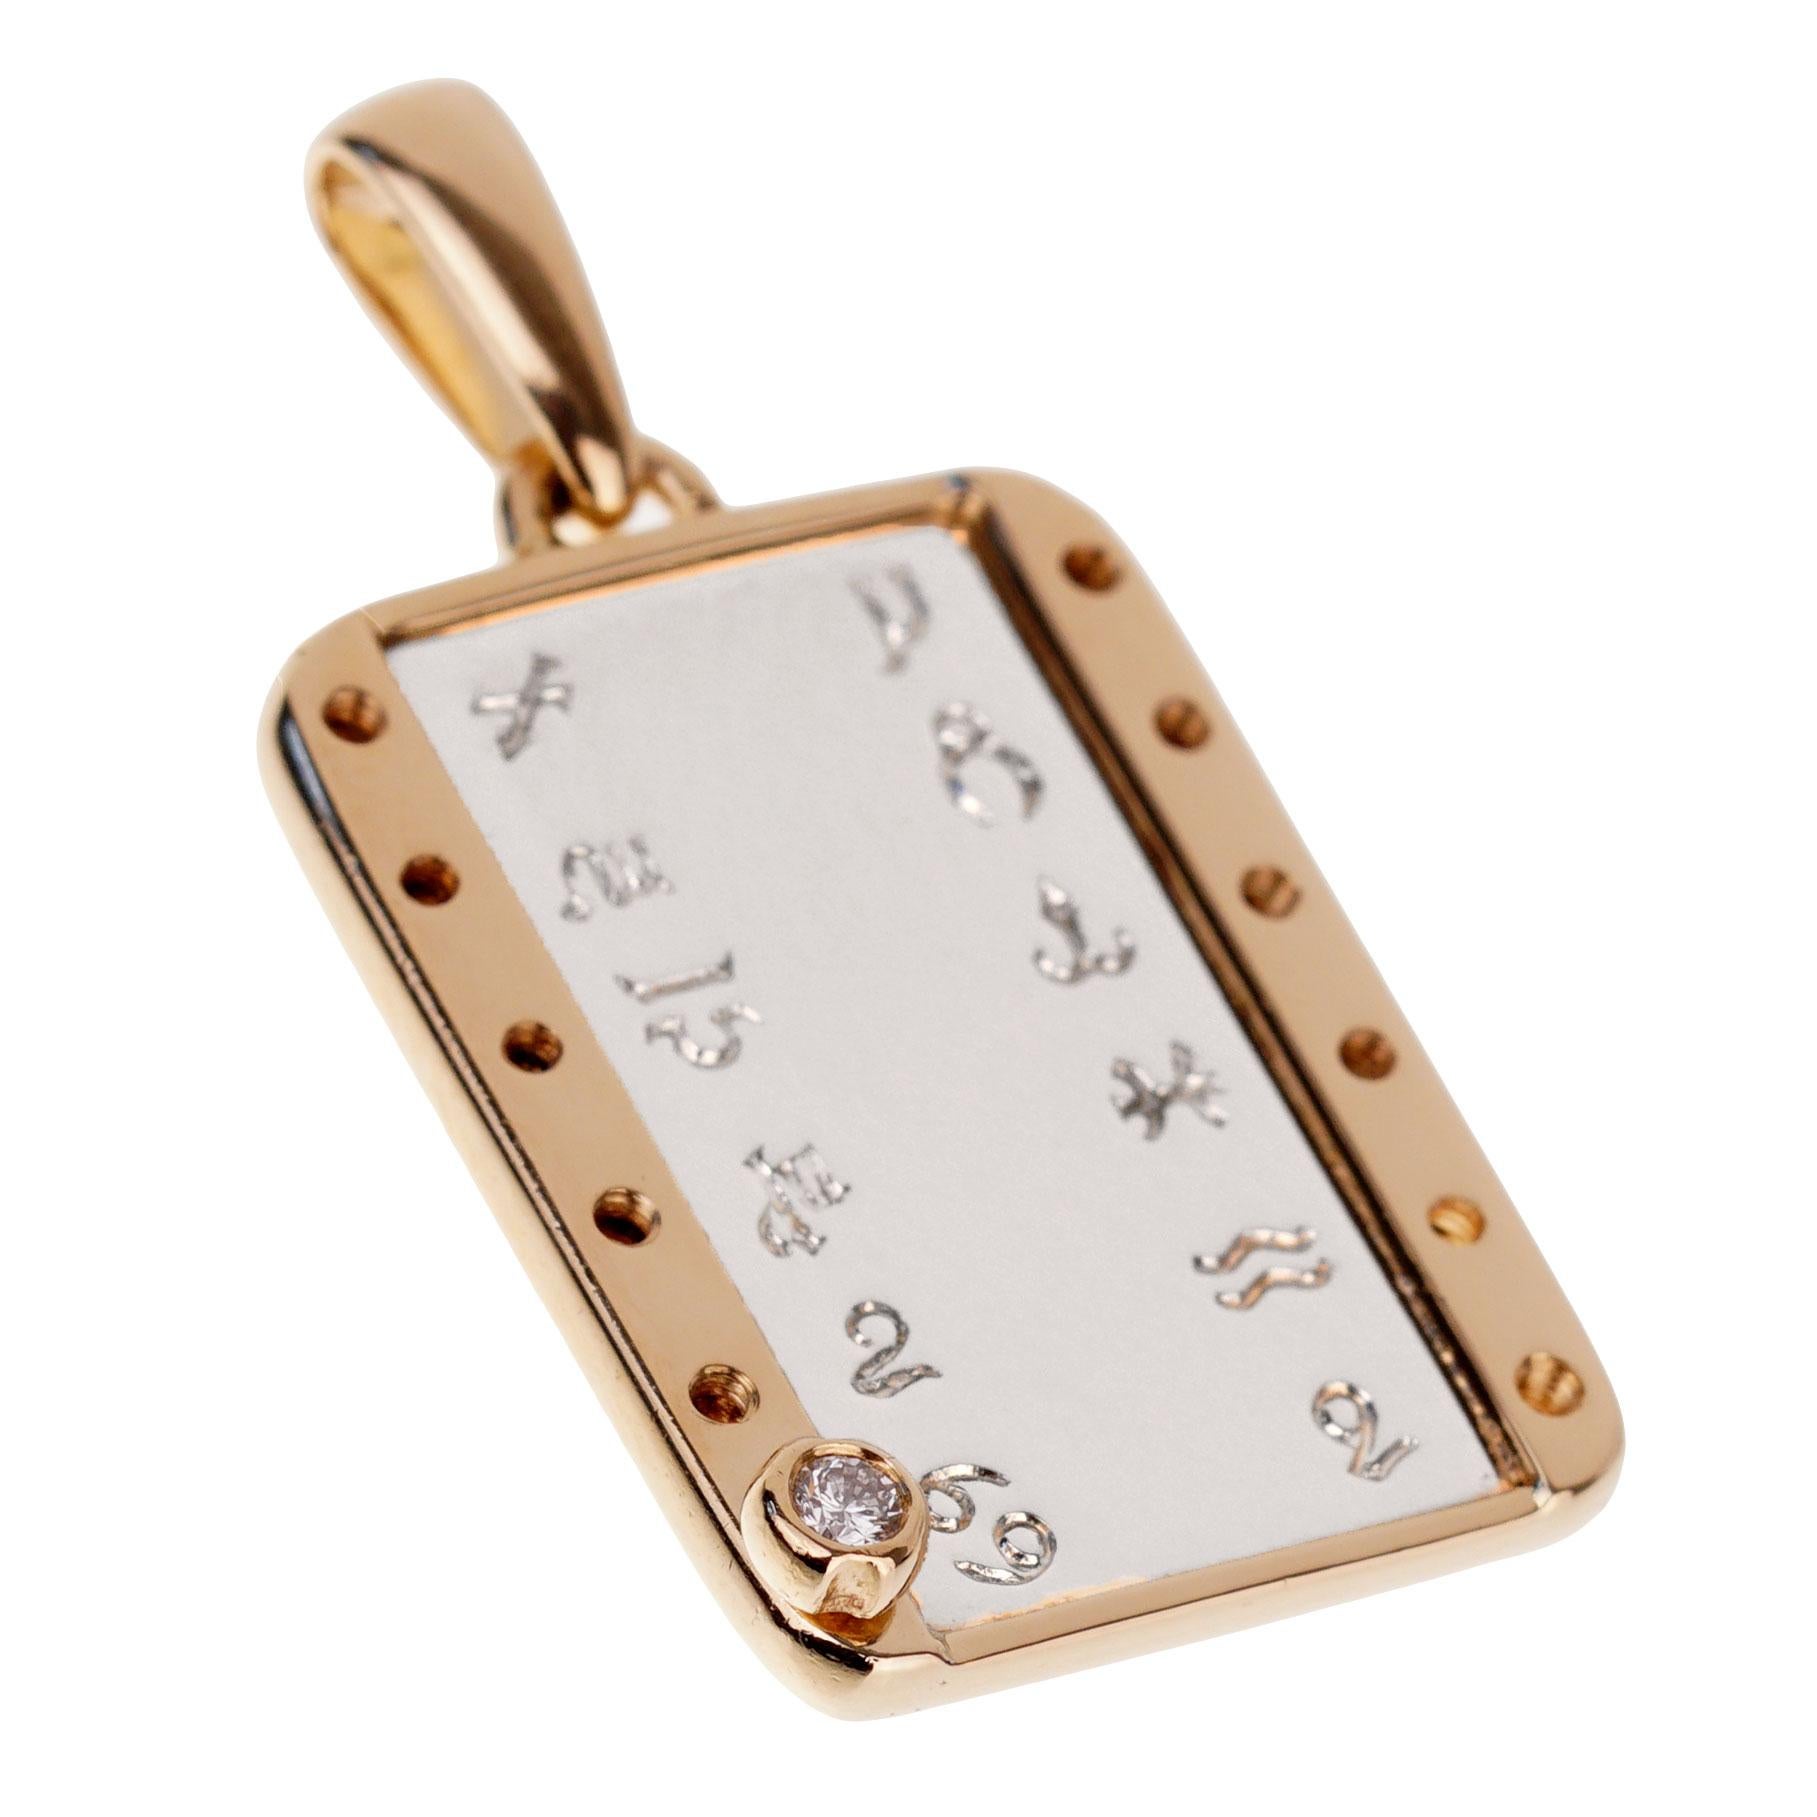 An iconic Cartier zodiac pendant featuring a removable diamond screw to set on your zodiac sign. The pendant white 18k white and yellow gold and has just been polished by Cartier, and will arrive in as new condition.

The pendant measures 1.25